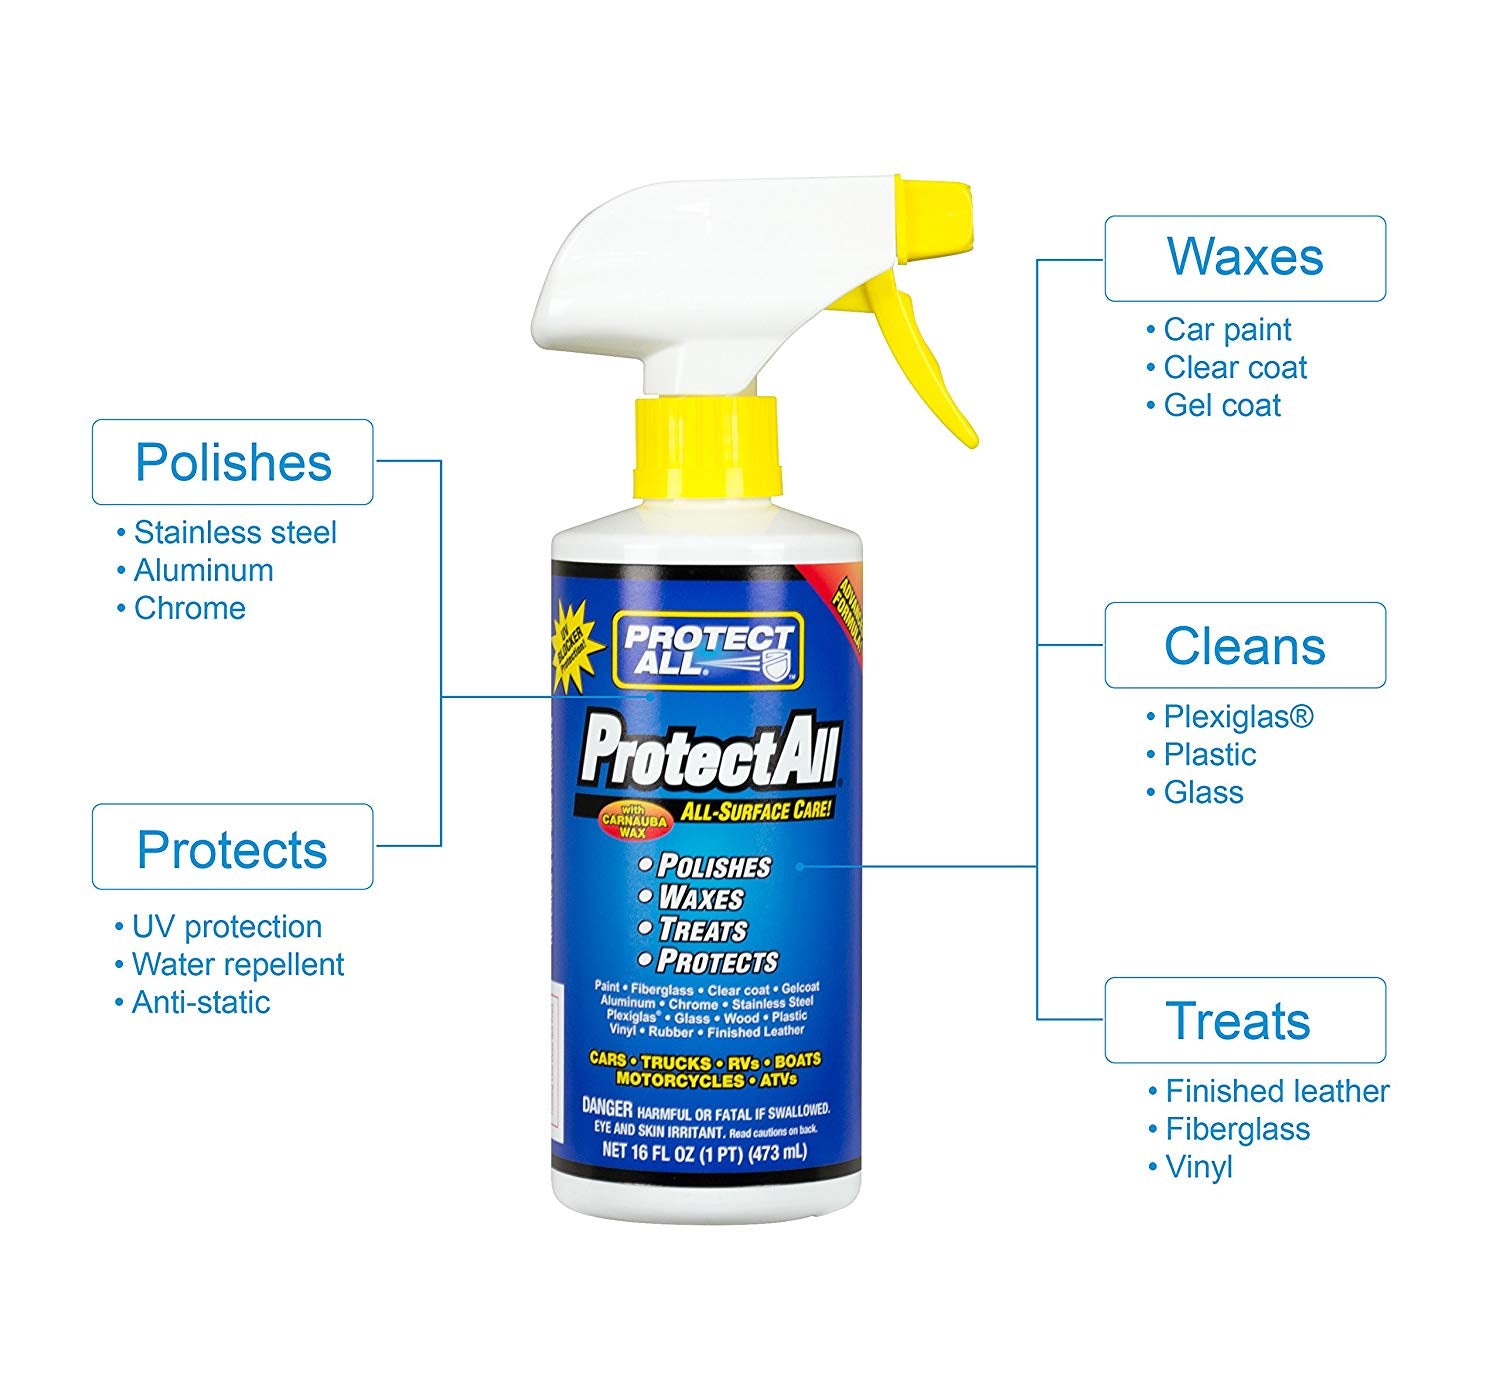 Protect All 62016 All-Surface Care Cleaner, Wax, Polisher and Protector - Interior and exterior use, 16 oz.